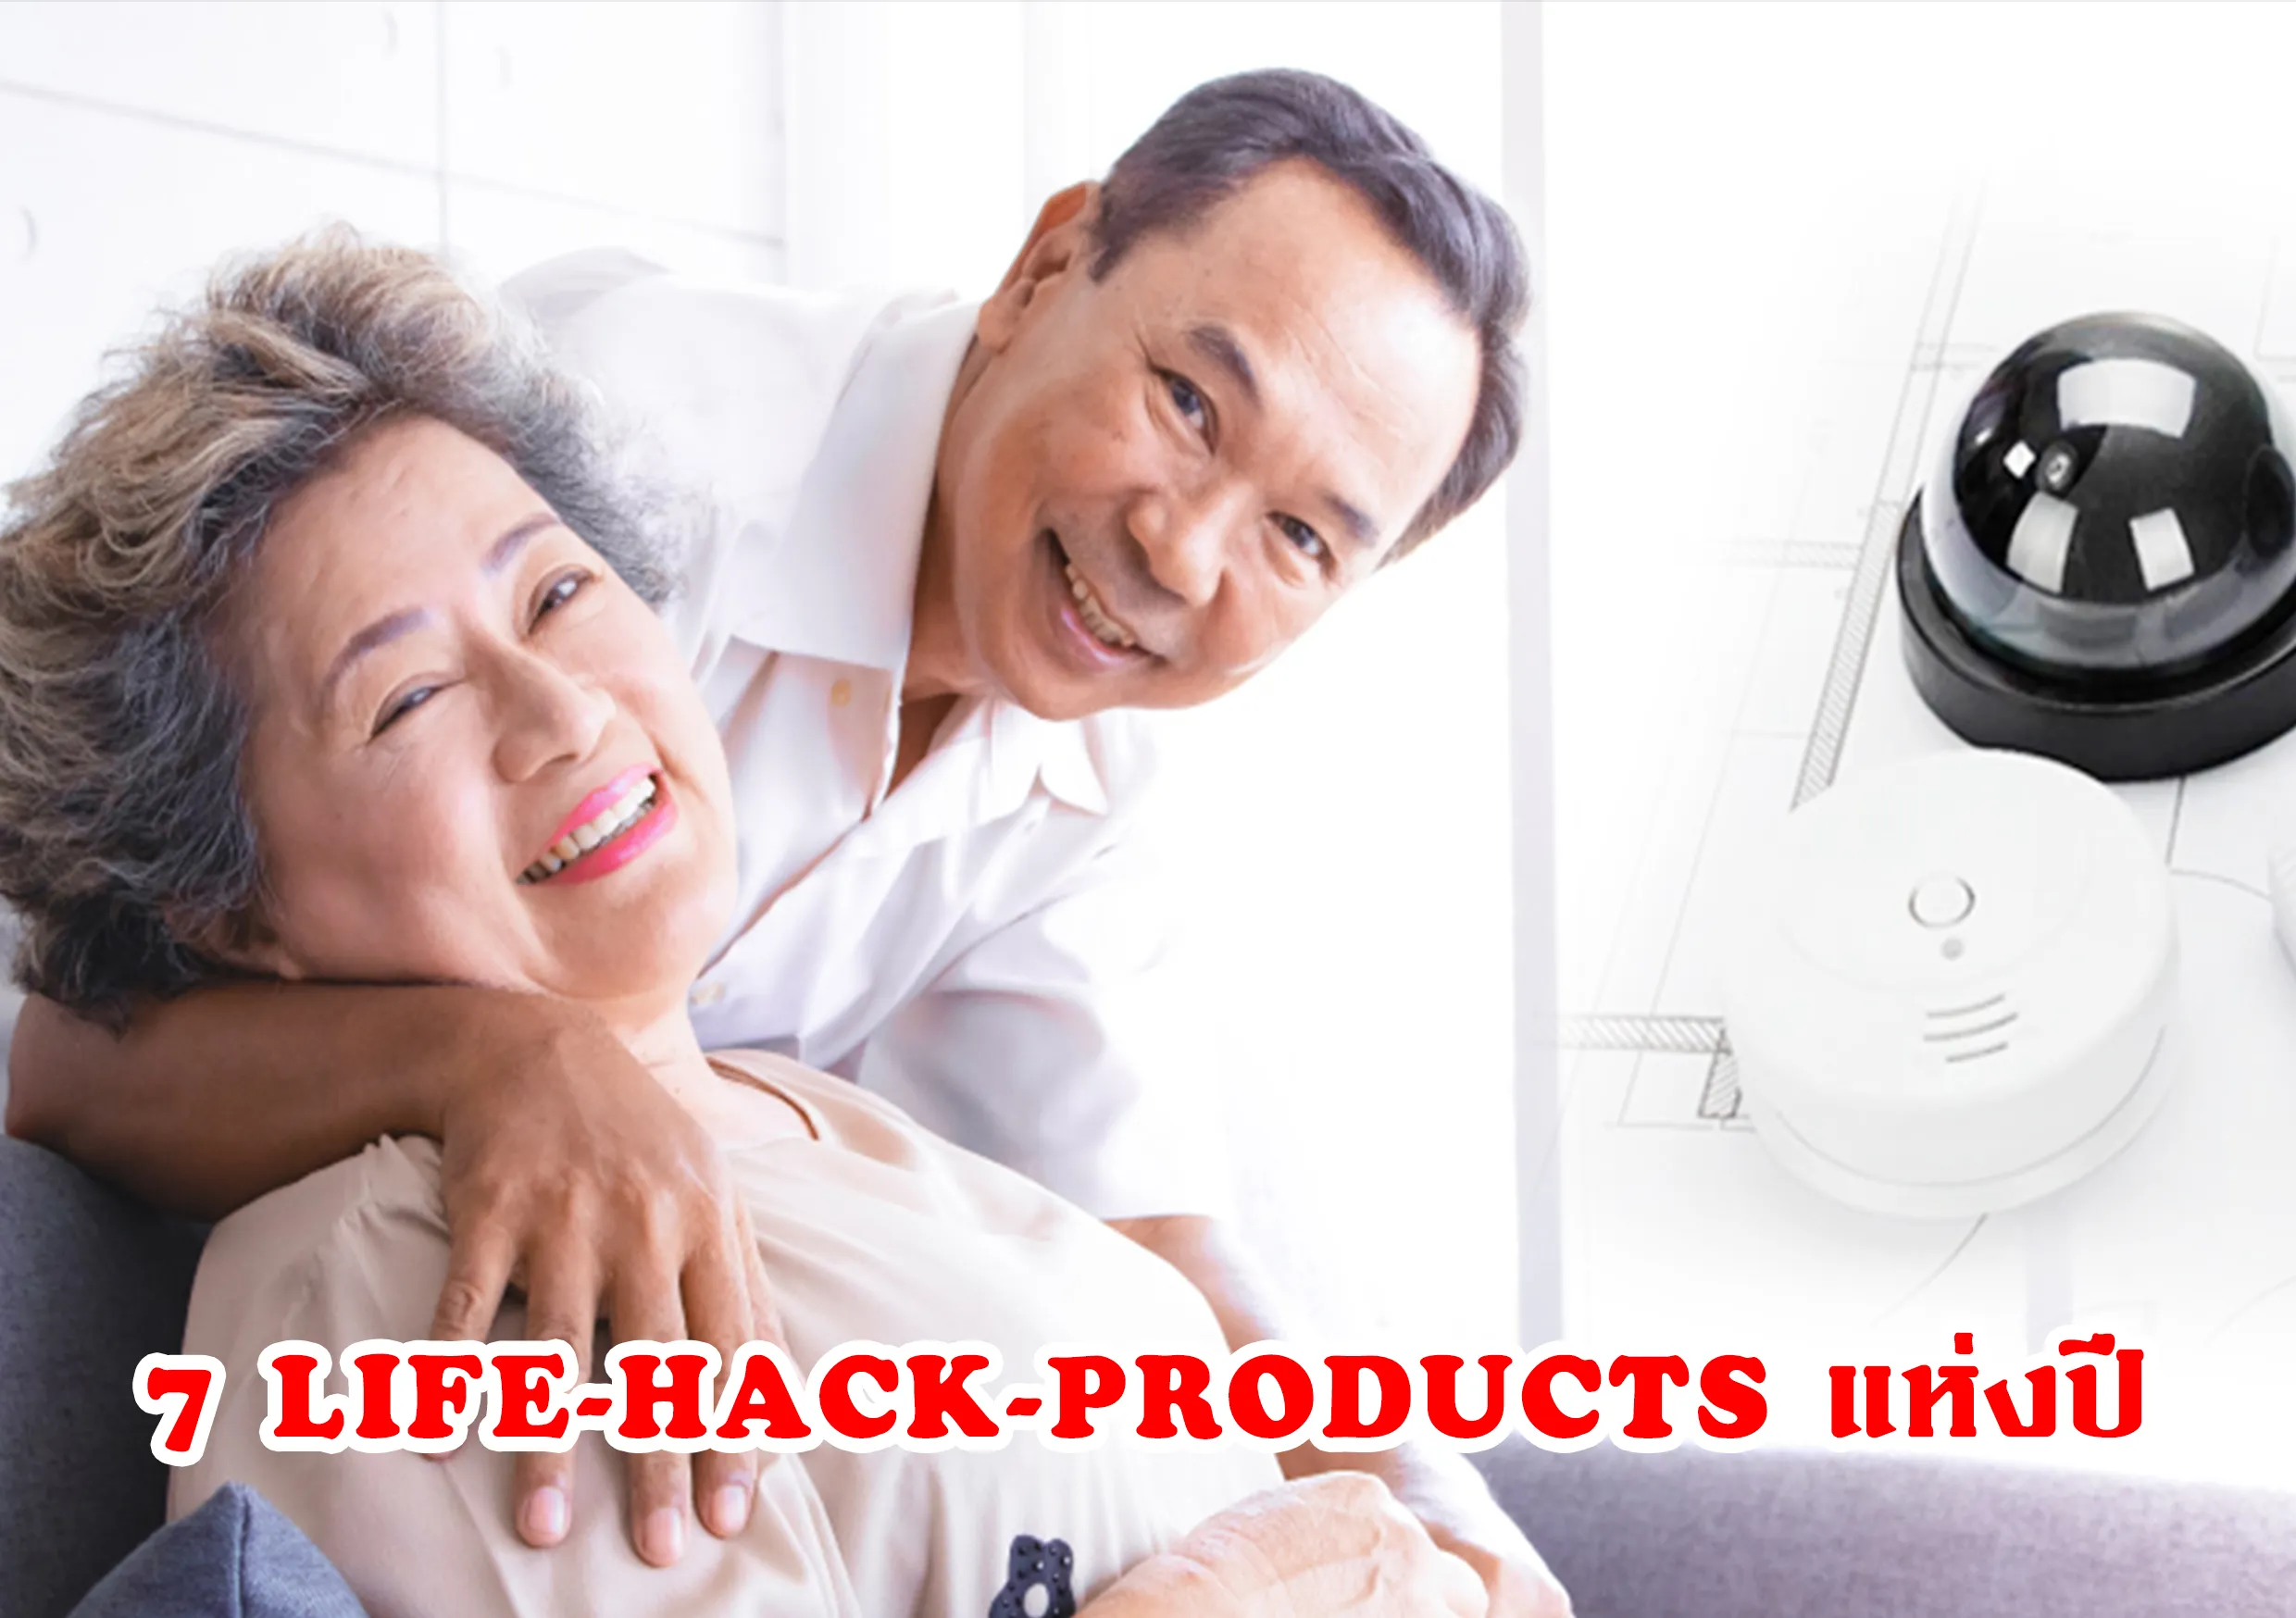 7 LIFE-HACK-PRODUCTS แห่งปี